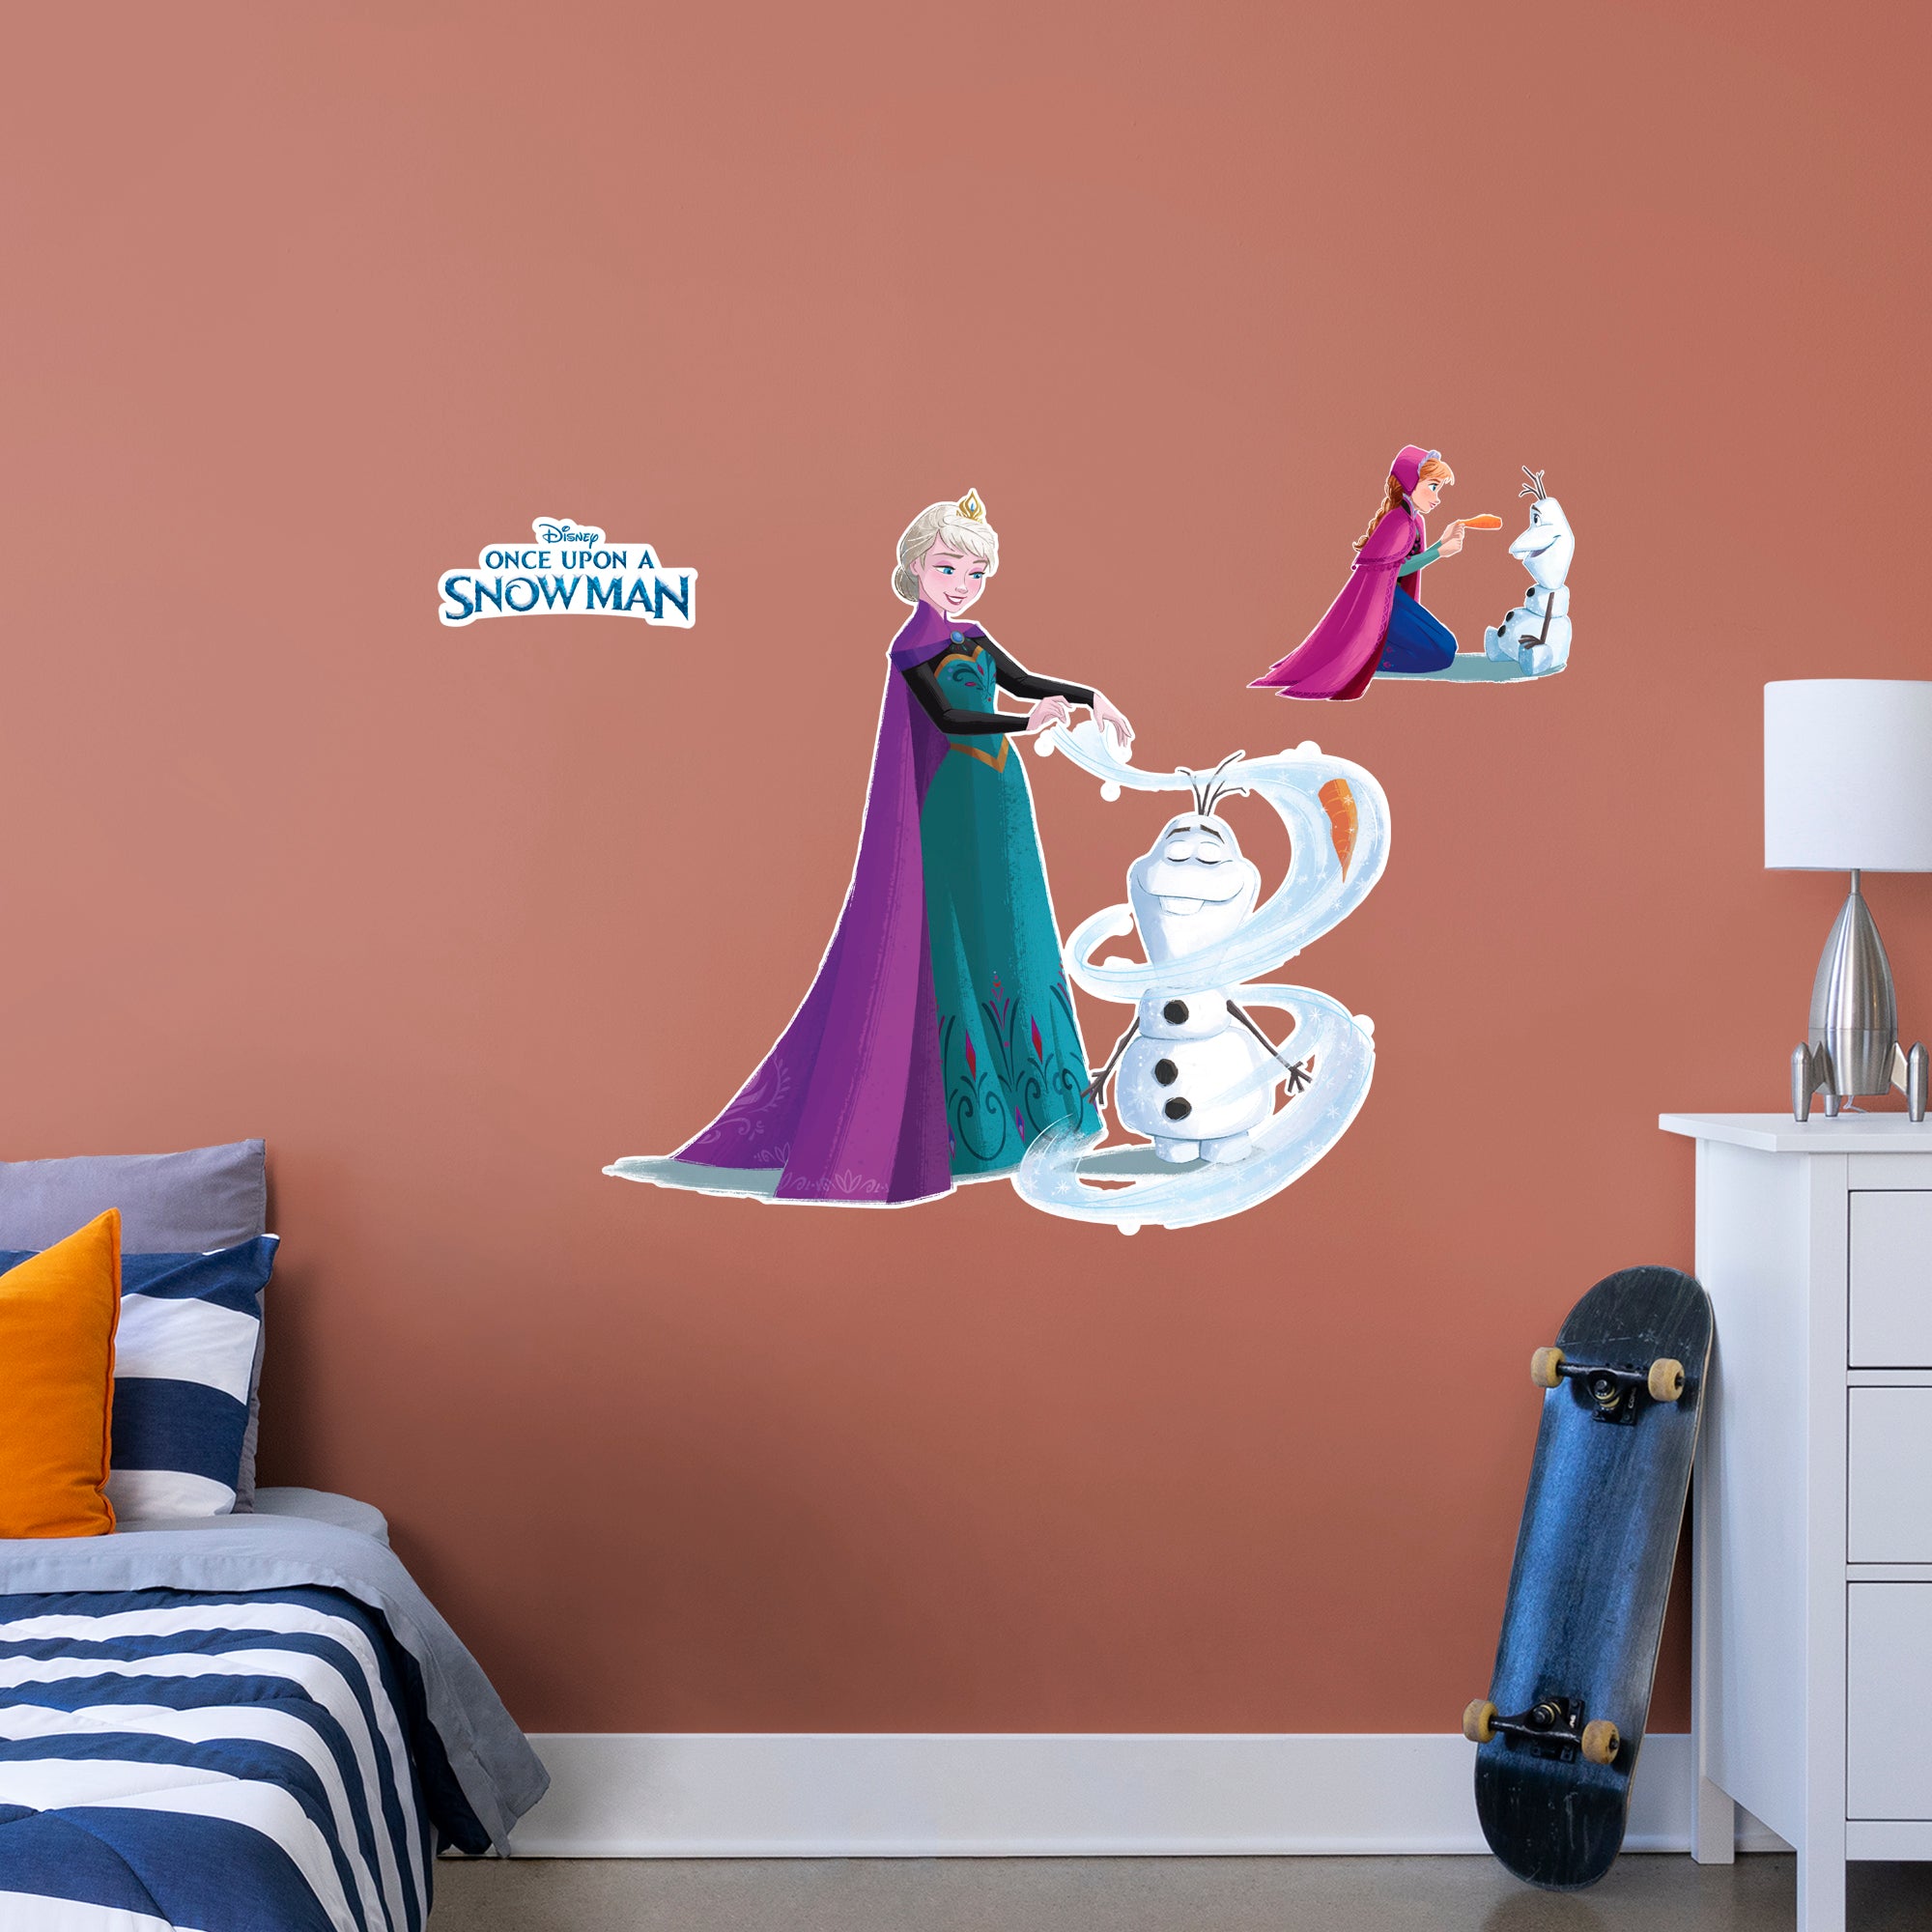 Olaf & Elsa: Frozen - Once Upon A Snowman - Officially Licensed Disney Removable Wall Decal Giant Character + 2 Decals by Fathea